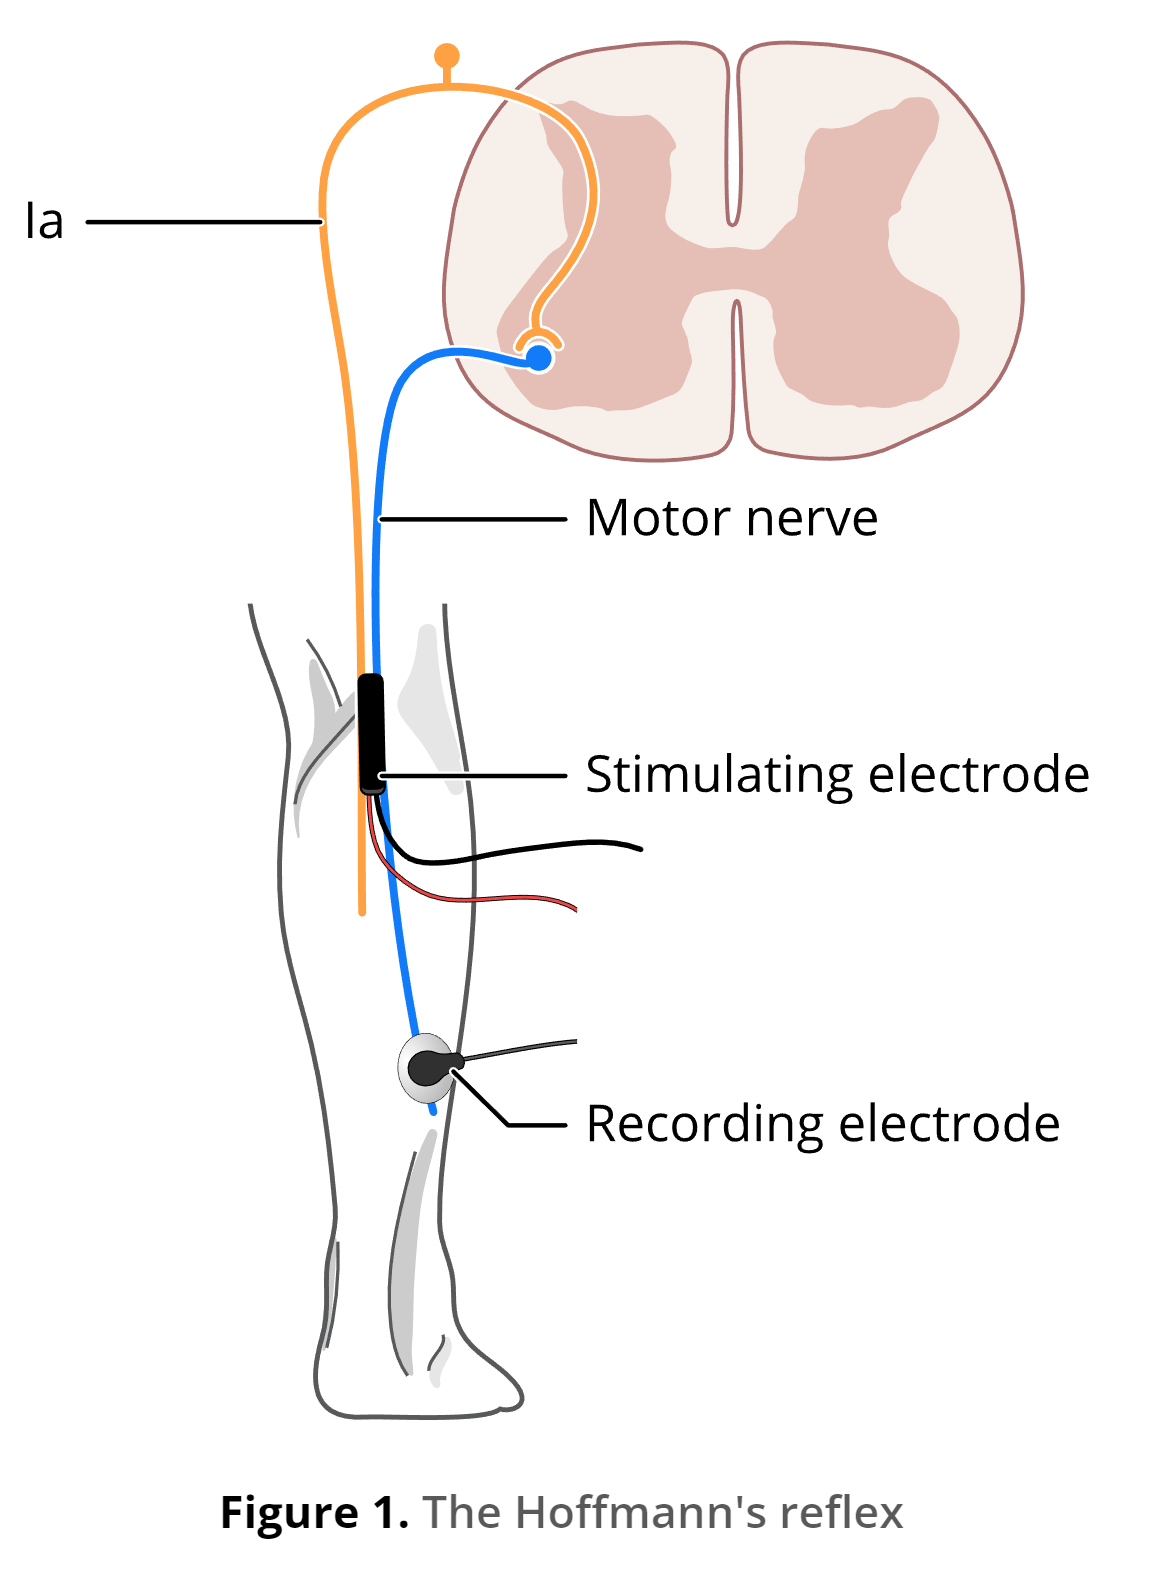 An illustrated diagram showing the key components of the Hoffmann's reflex, including the motor nerve, stimulating electrode, and recording electrode.